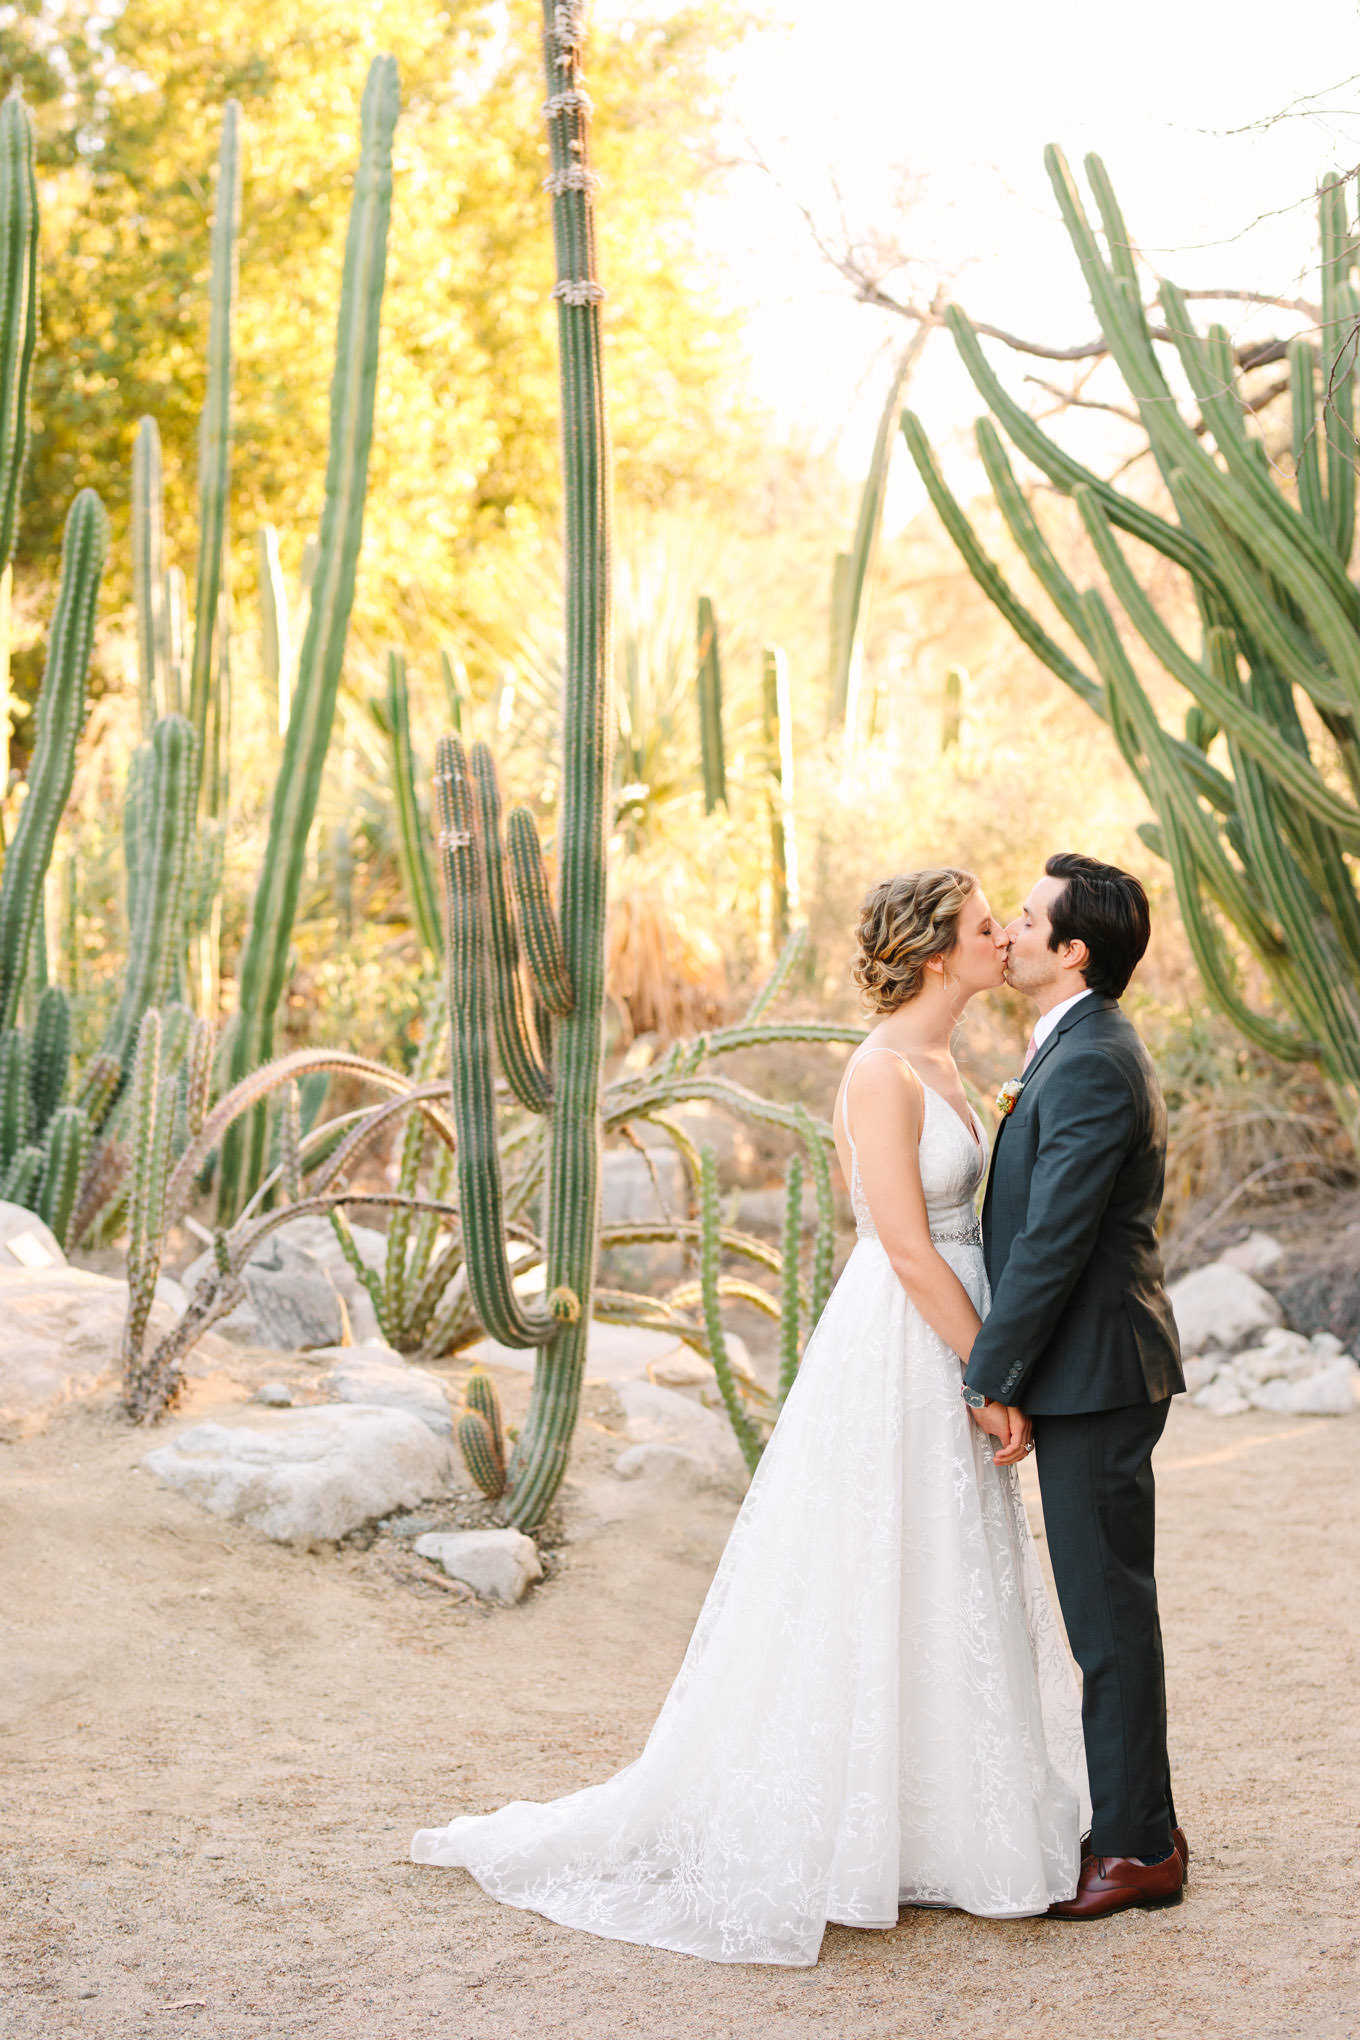 Wedding portrait of bride and groom in cactus garden | Living Desert Zoo & Gardens wedding with unique details | Elevated and colorful wedding photography for fun-loving couples in Southern California |  #PalmSprings #palmspringsphotographer #gardenwedding #palmspringswedding  Source: Mary Costa Photography | Los Angeles wedding photographer 